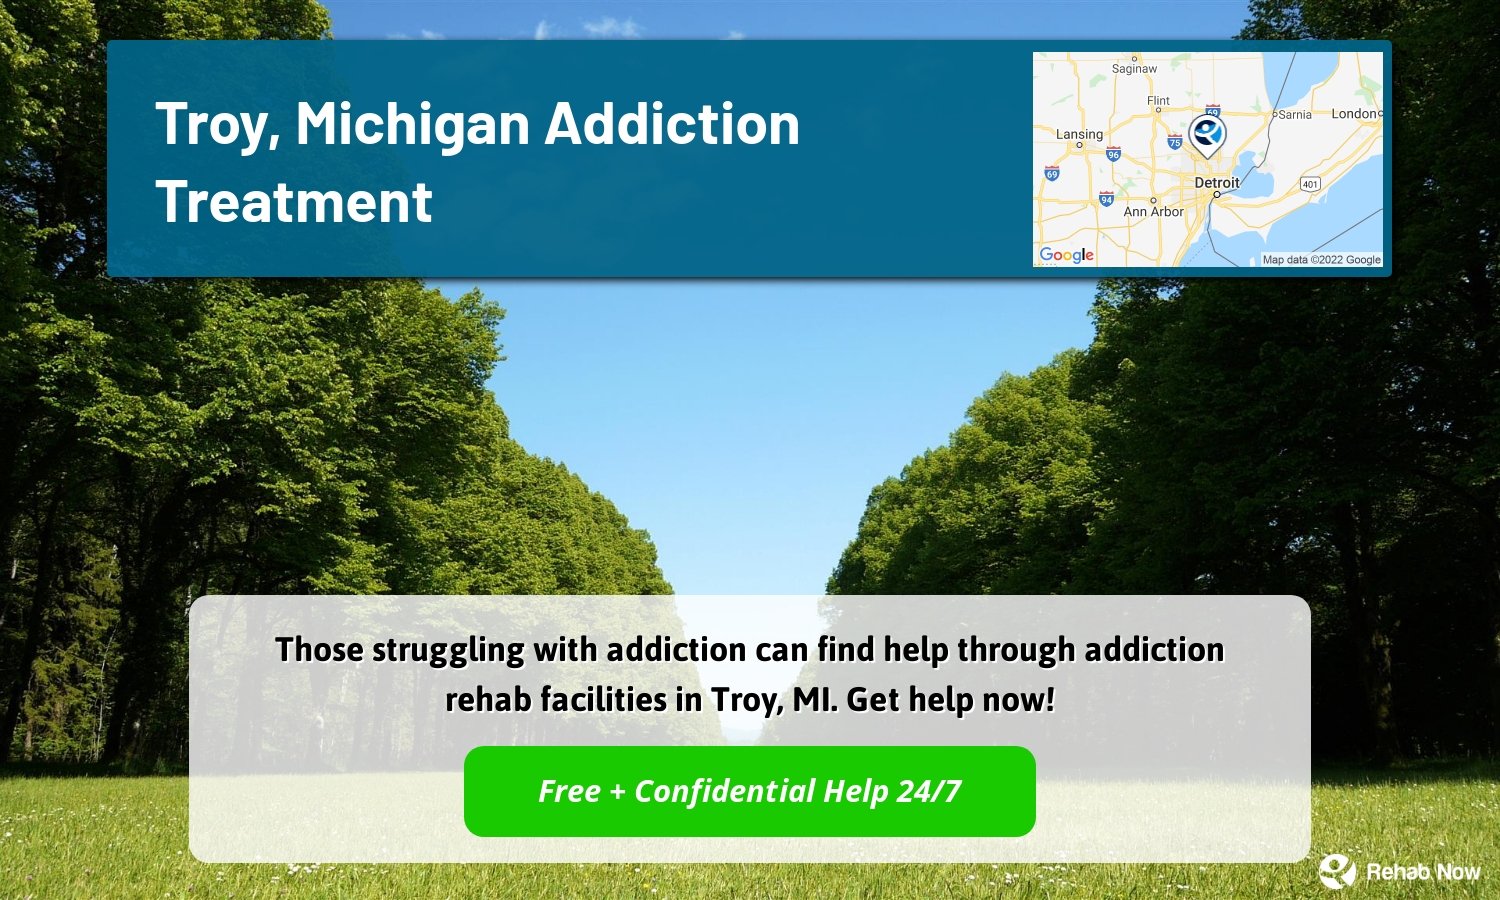 Those struggling with addiction can find help through addiction rehab facilities in Troy, MI. Get help now!